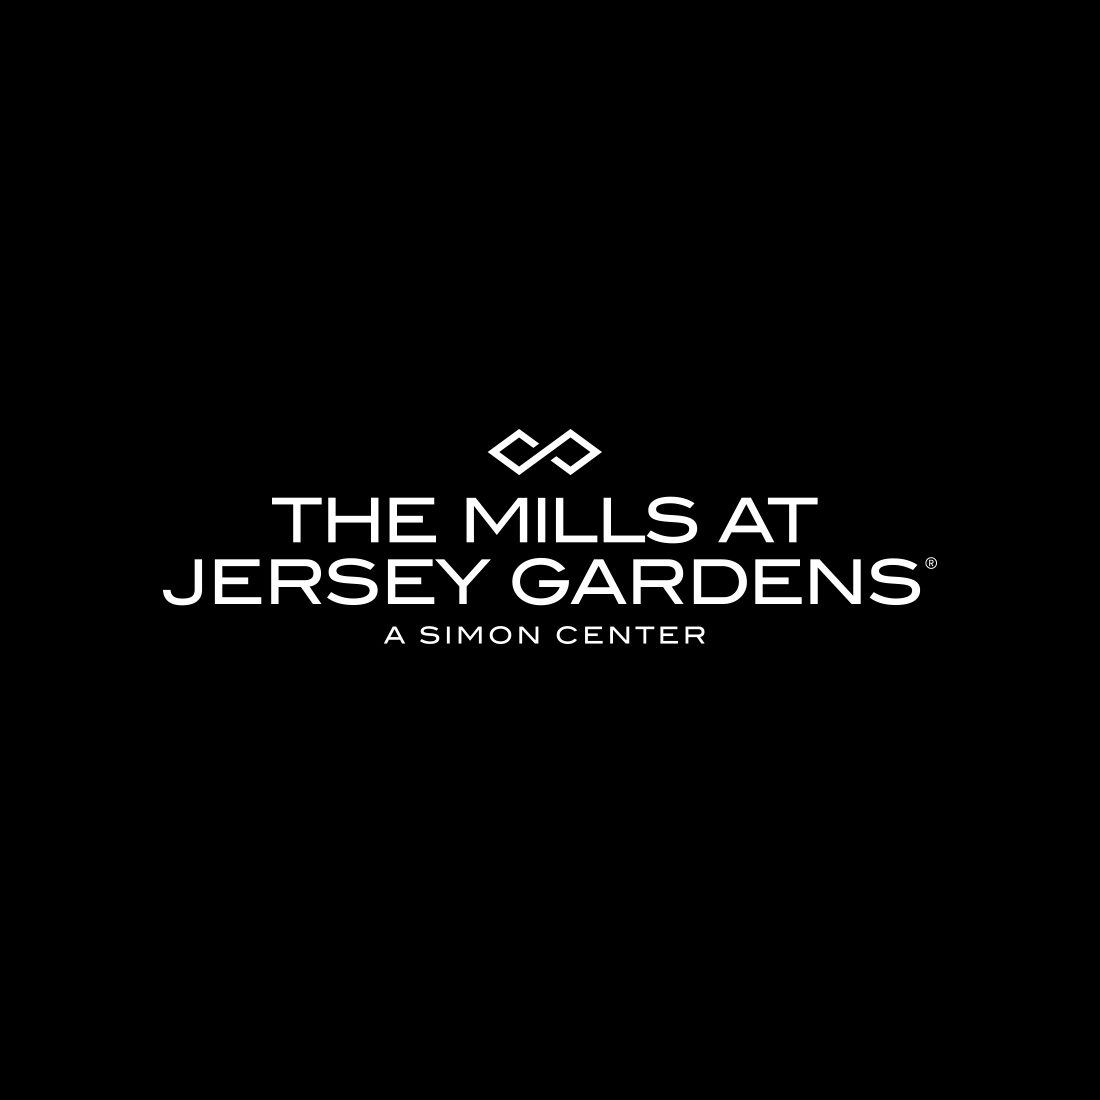 The Mills at Jersey Gardens